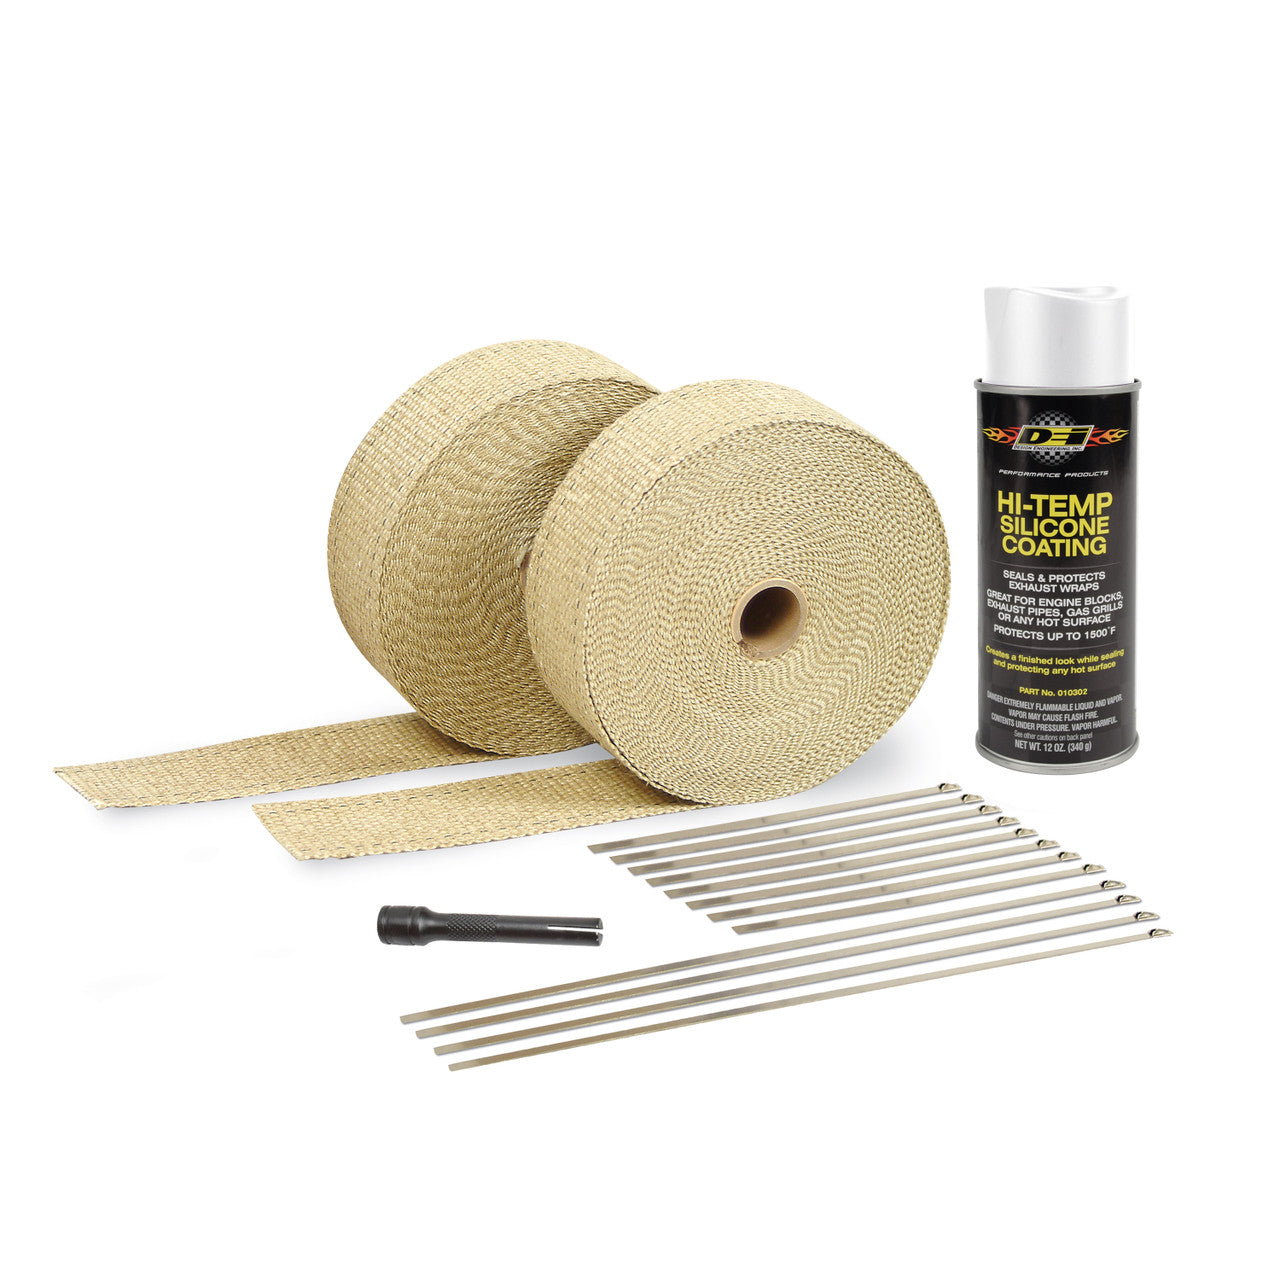 Complete Exhaust & Header Wrap Kits